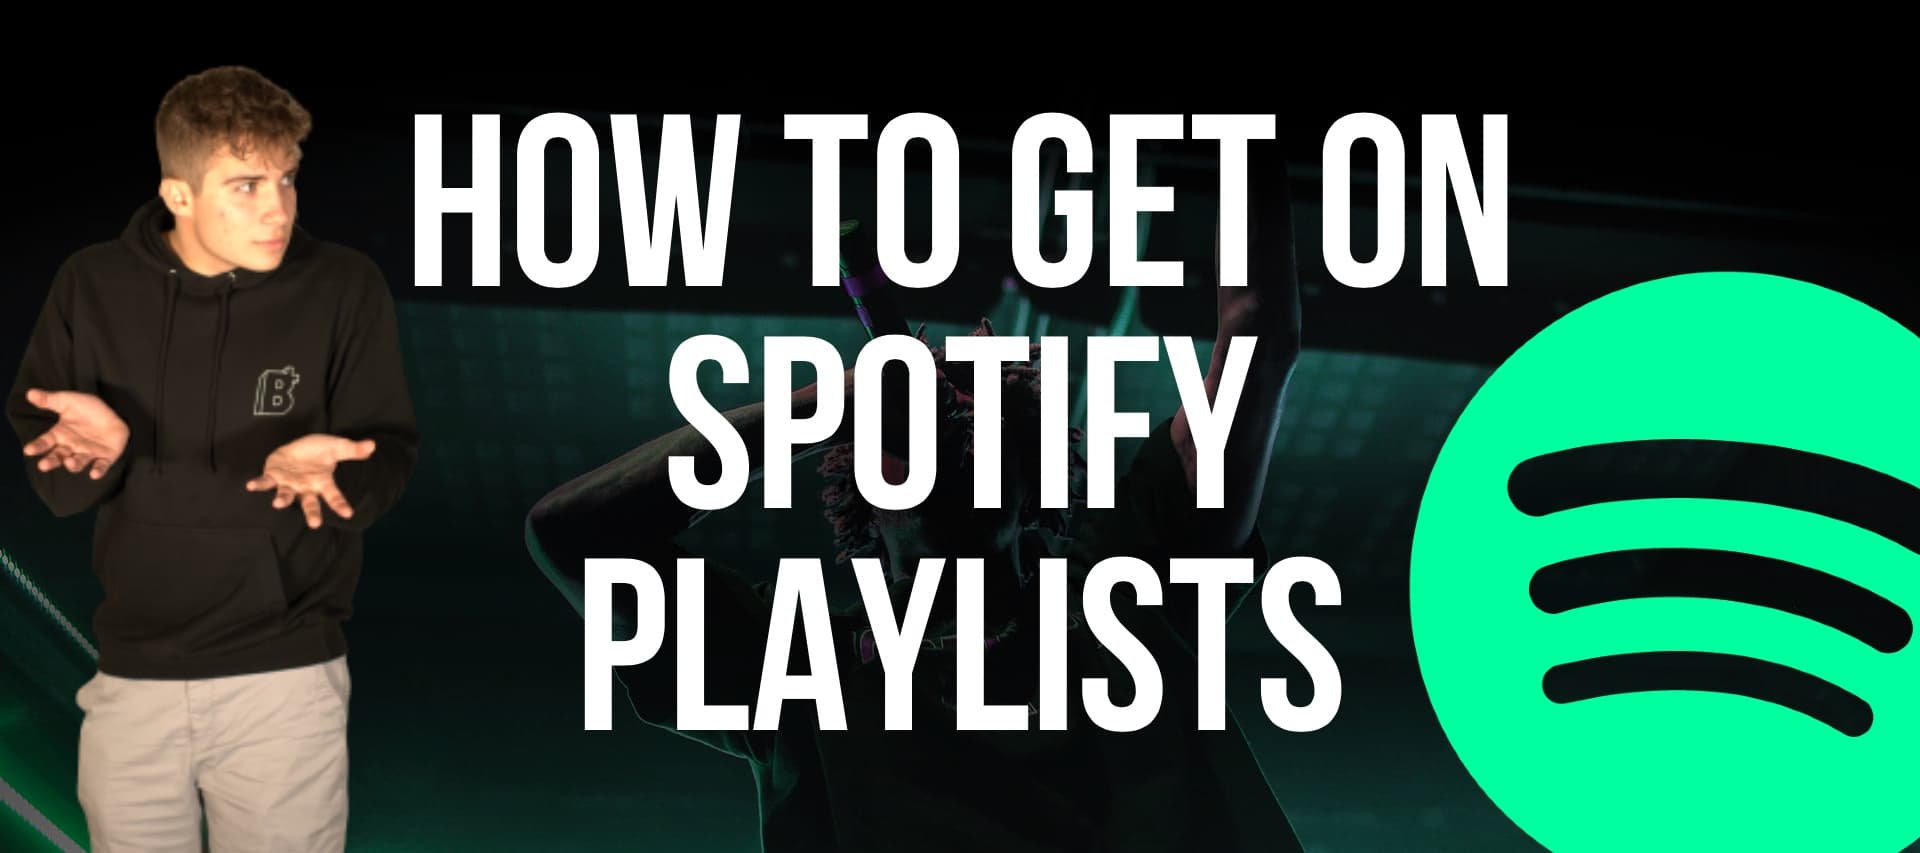 How to Get on Spotify Playlists